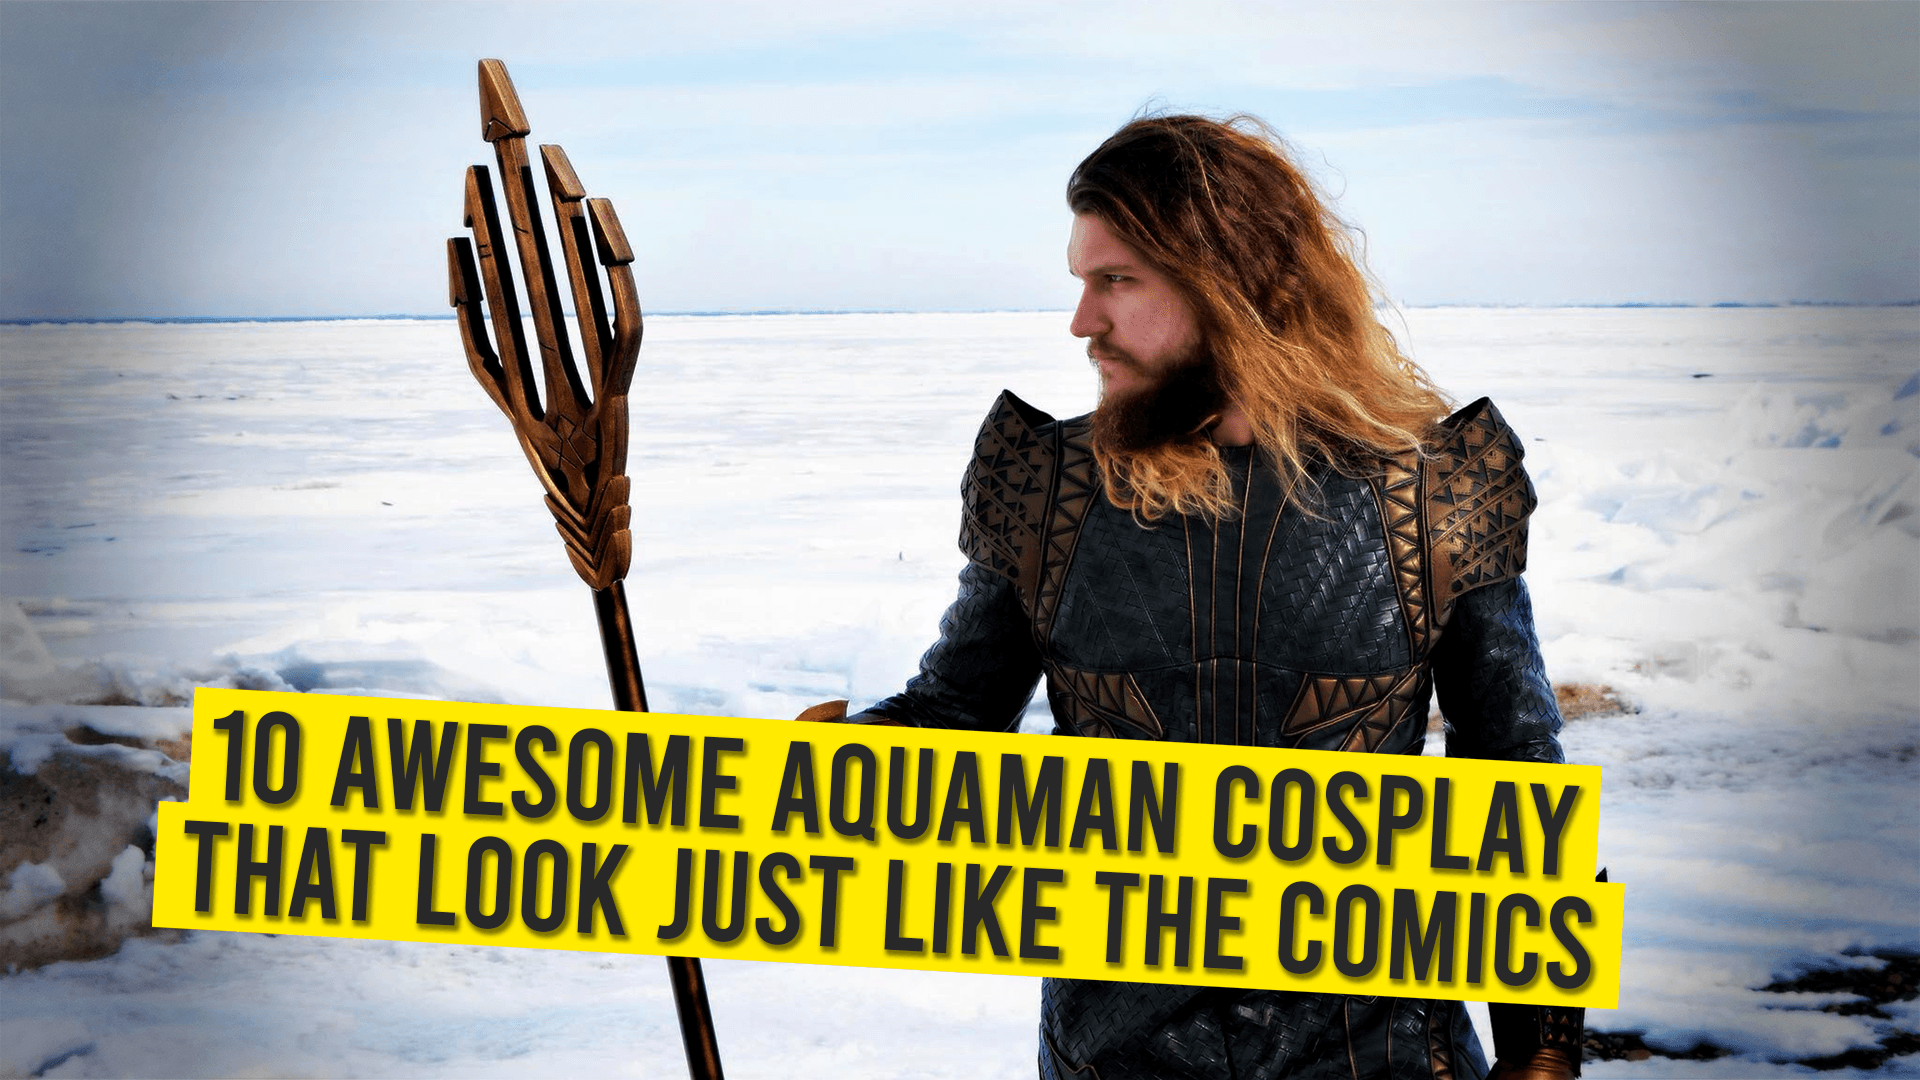 10 Awesome Aquaman Cosplay That Look Just Like The Comics